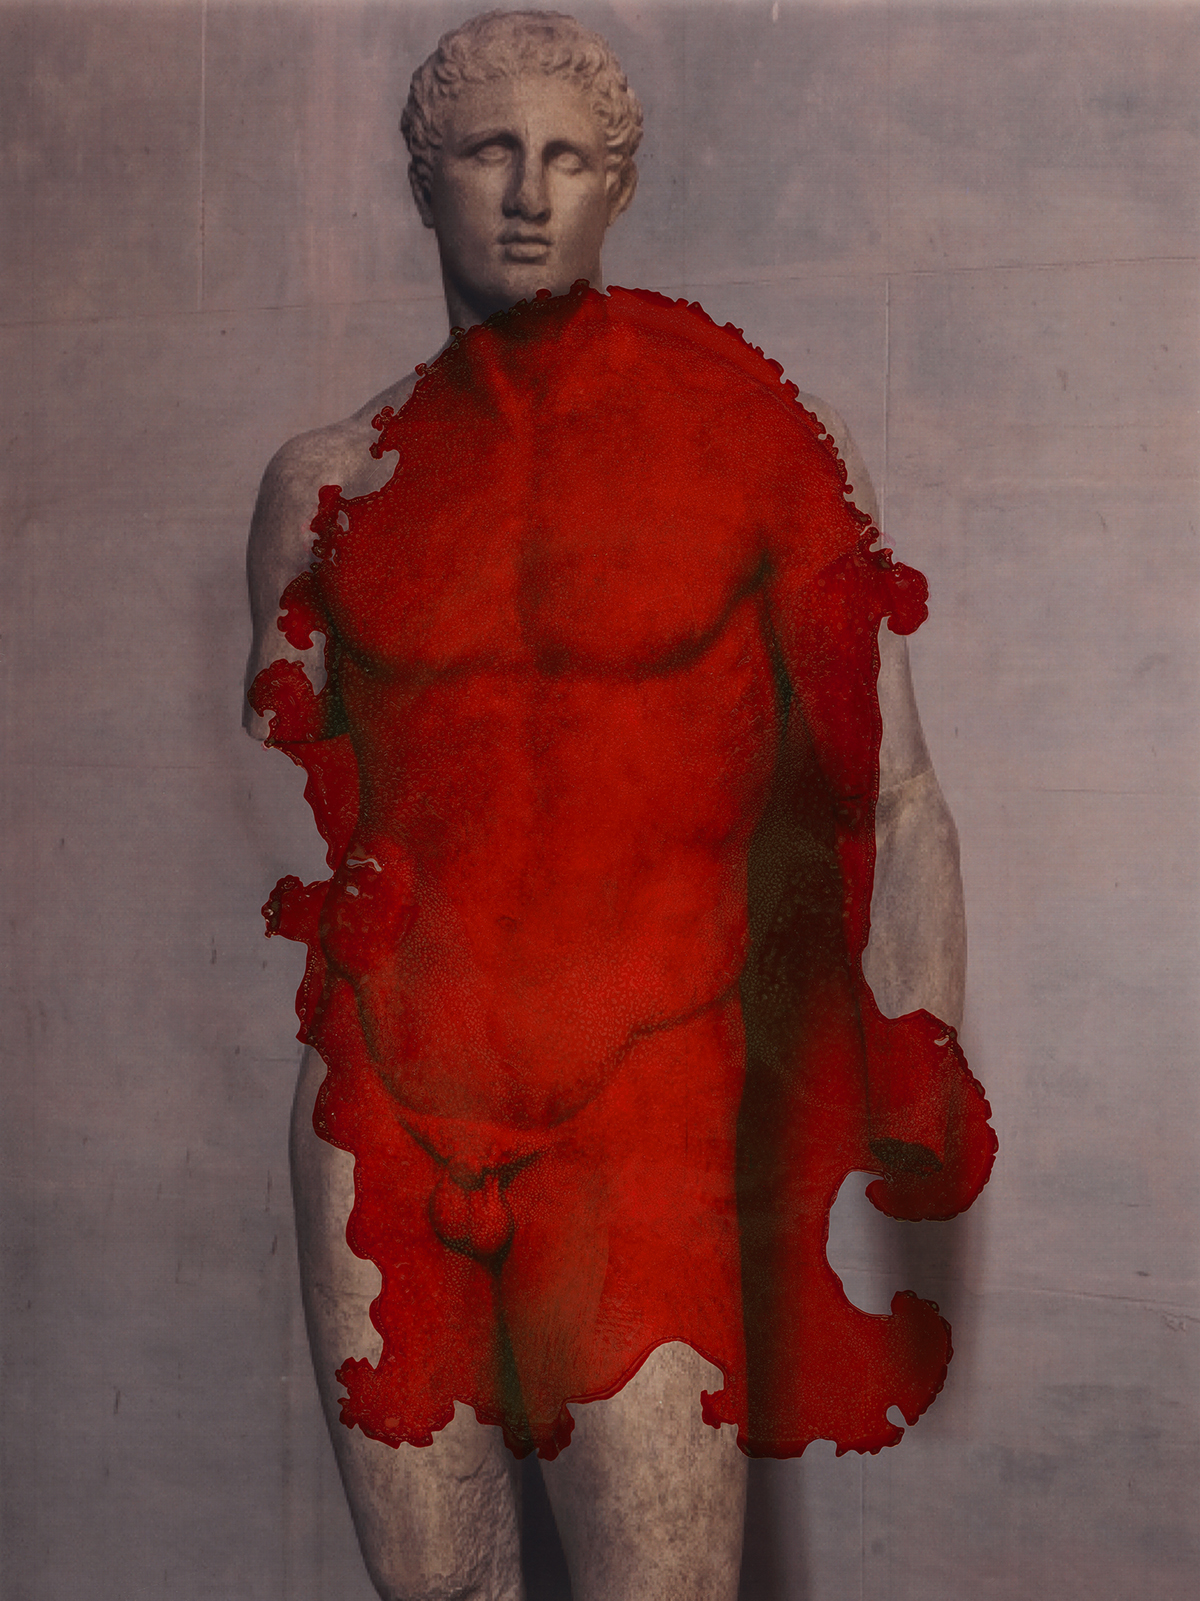 Male nude classical sculpture with red dye